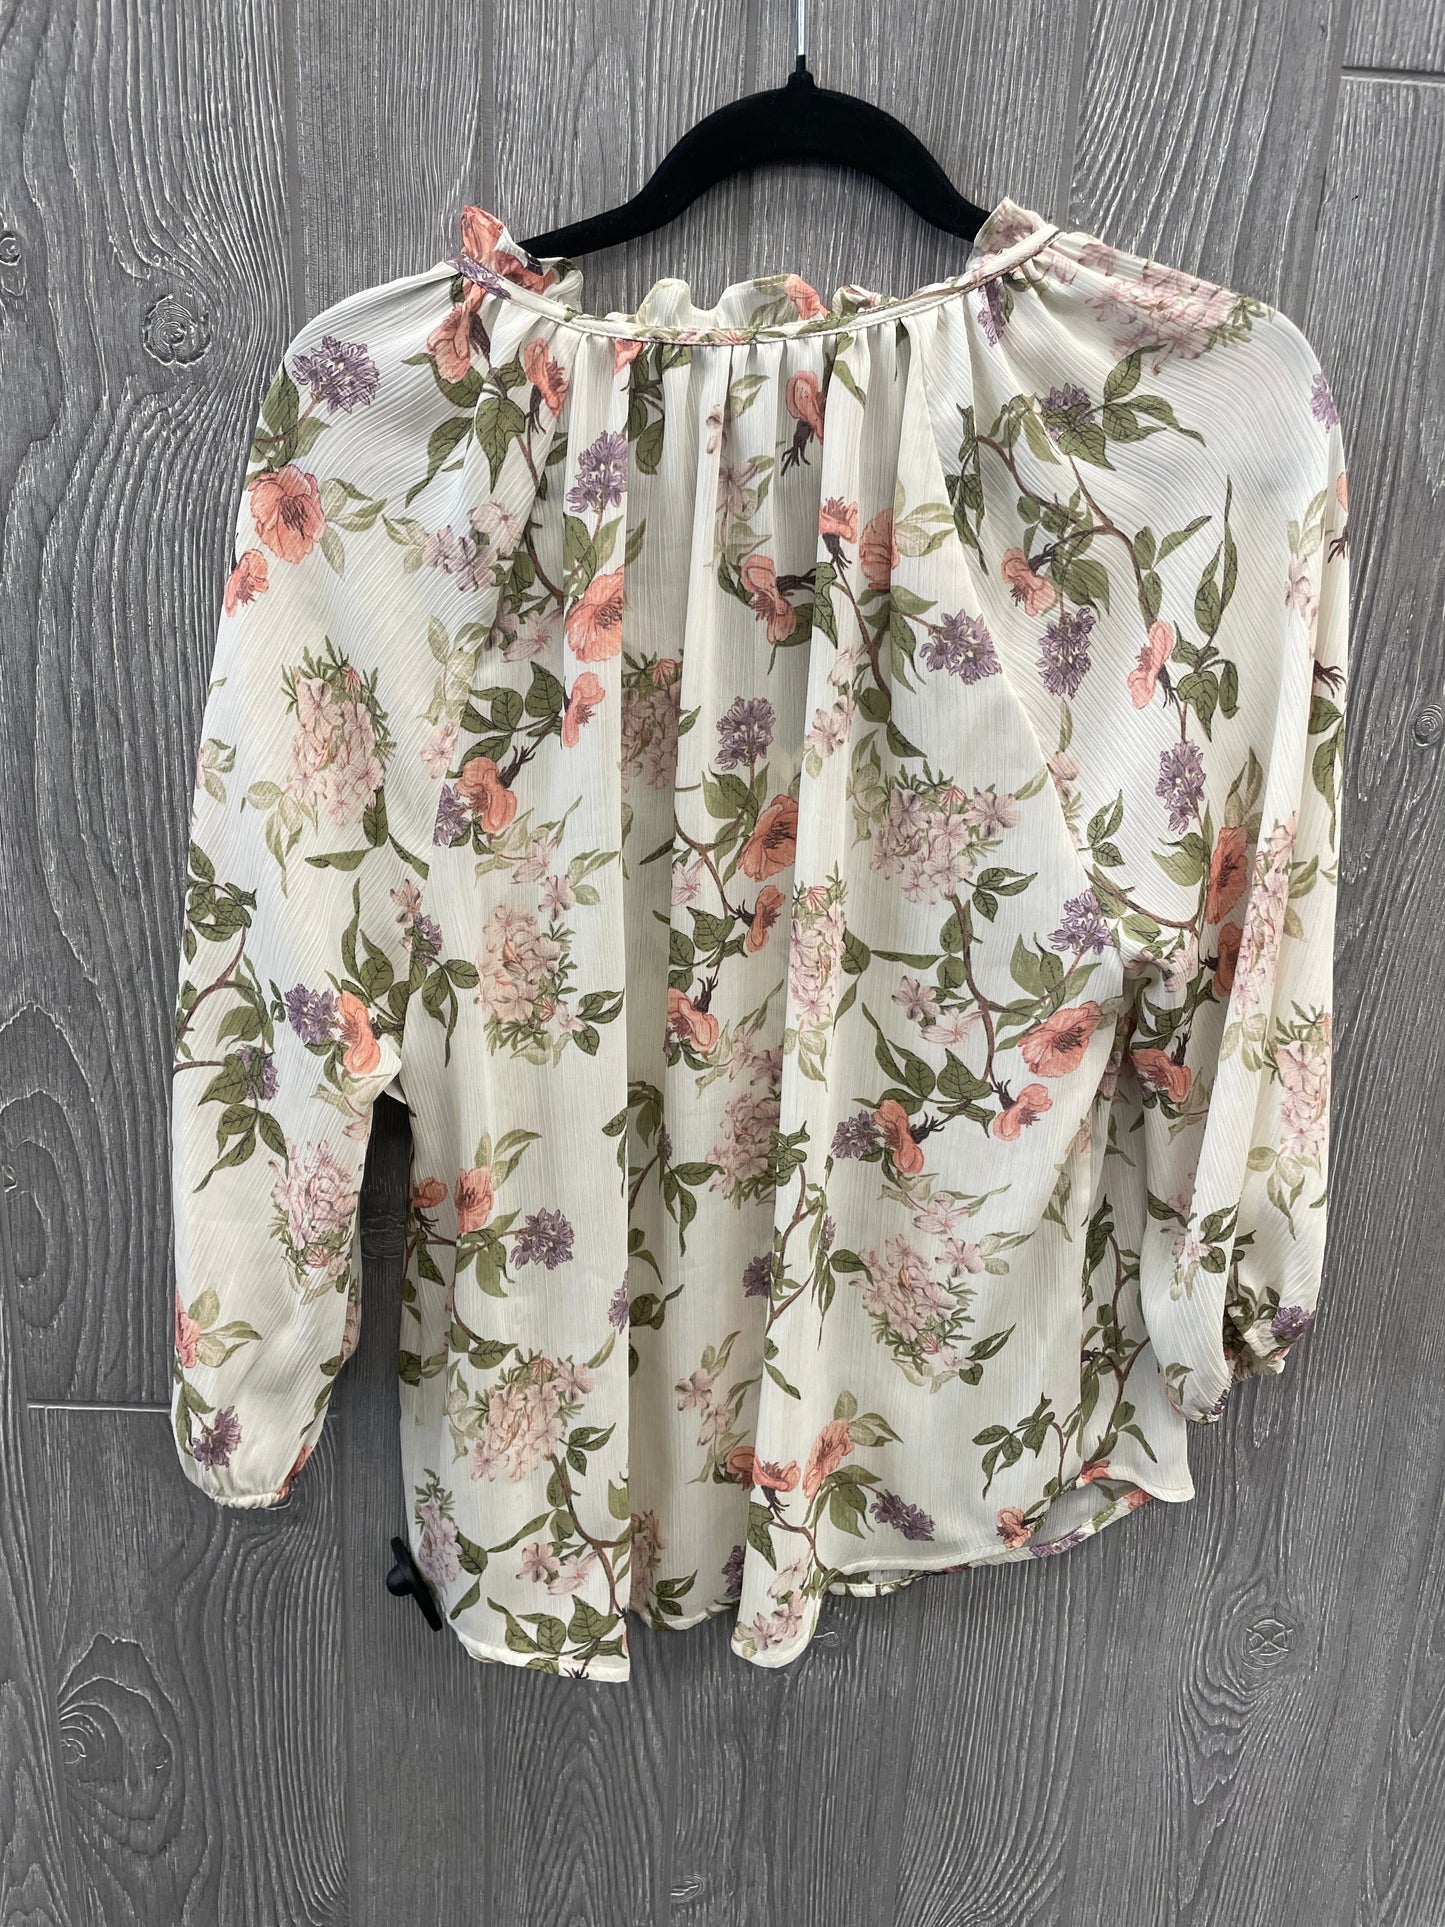 Floral Print Top Long Sleeve Chaps, Size S